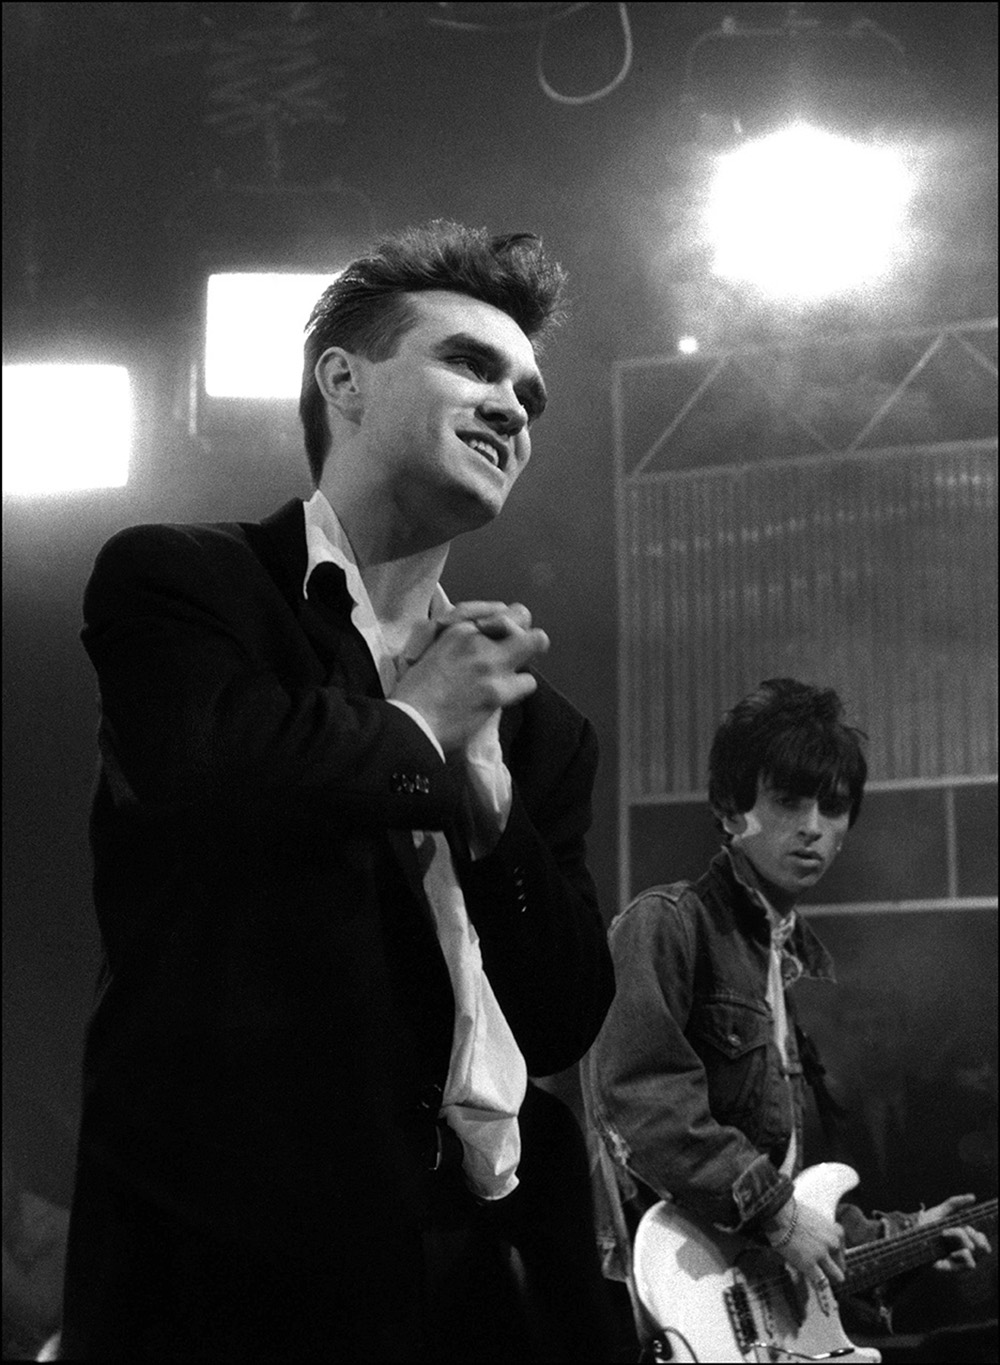 The Smiths perform The Headmaster Ritual on The Oxford Road Show in Manchester, 2 February 1985